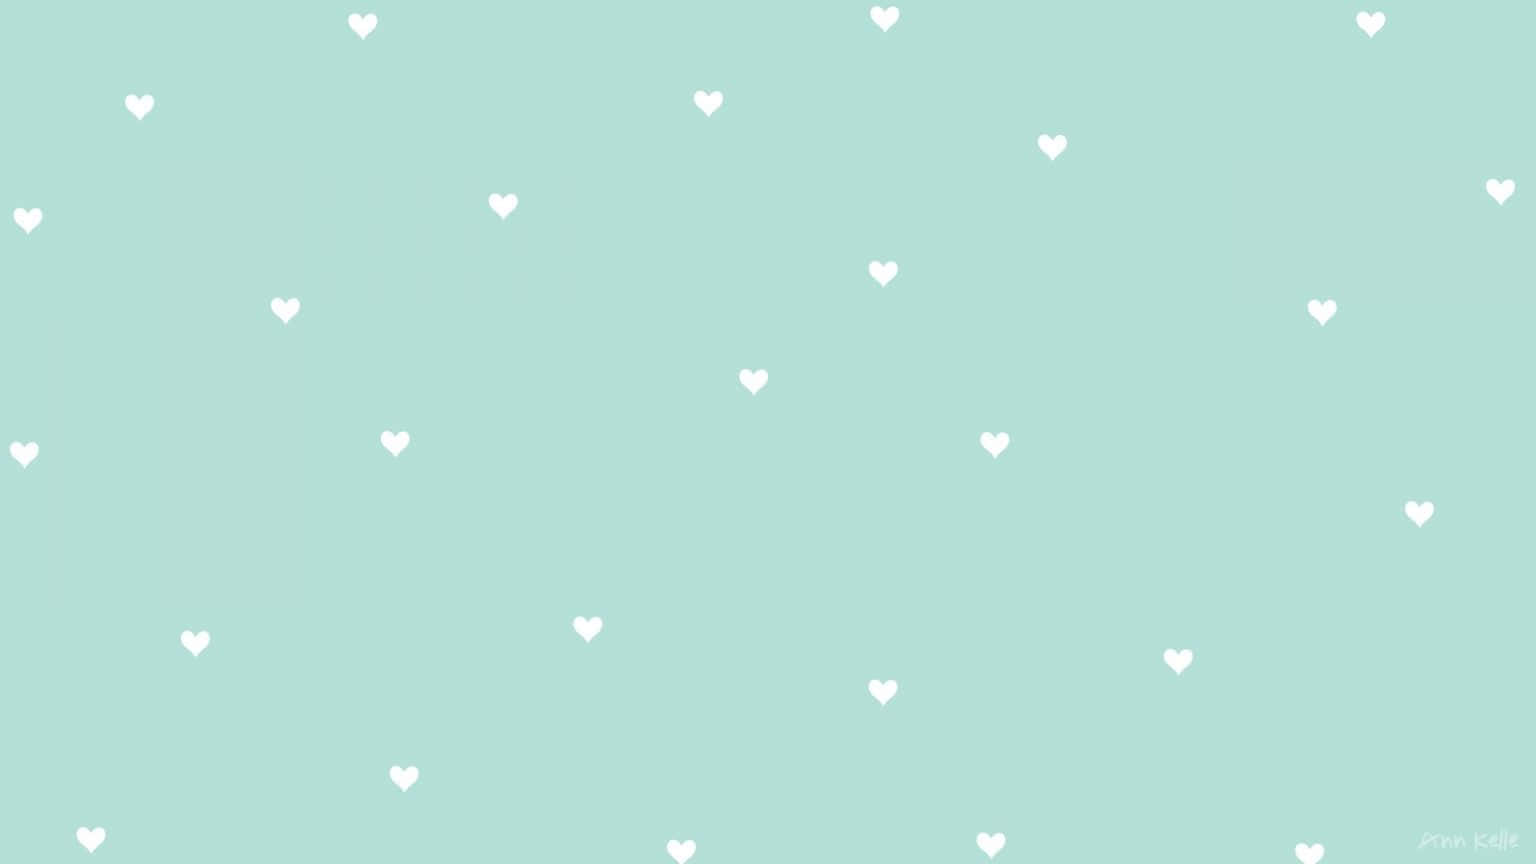 Download Polka Dots Cute Green Aesthetic Background | Wallpapers.com